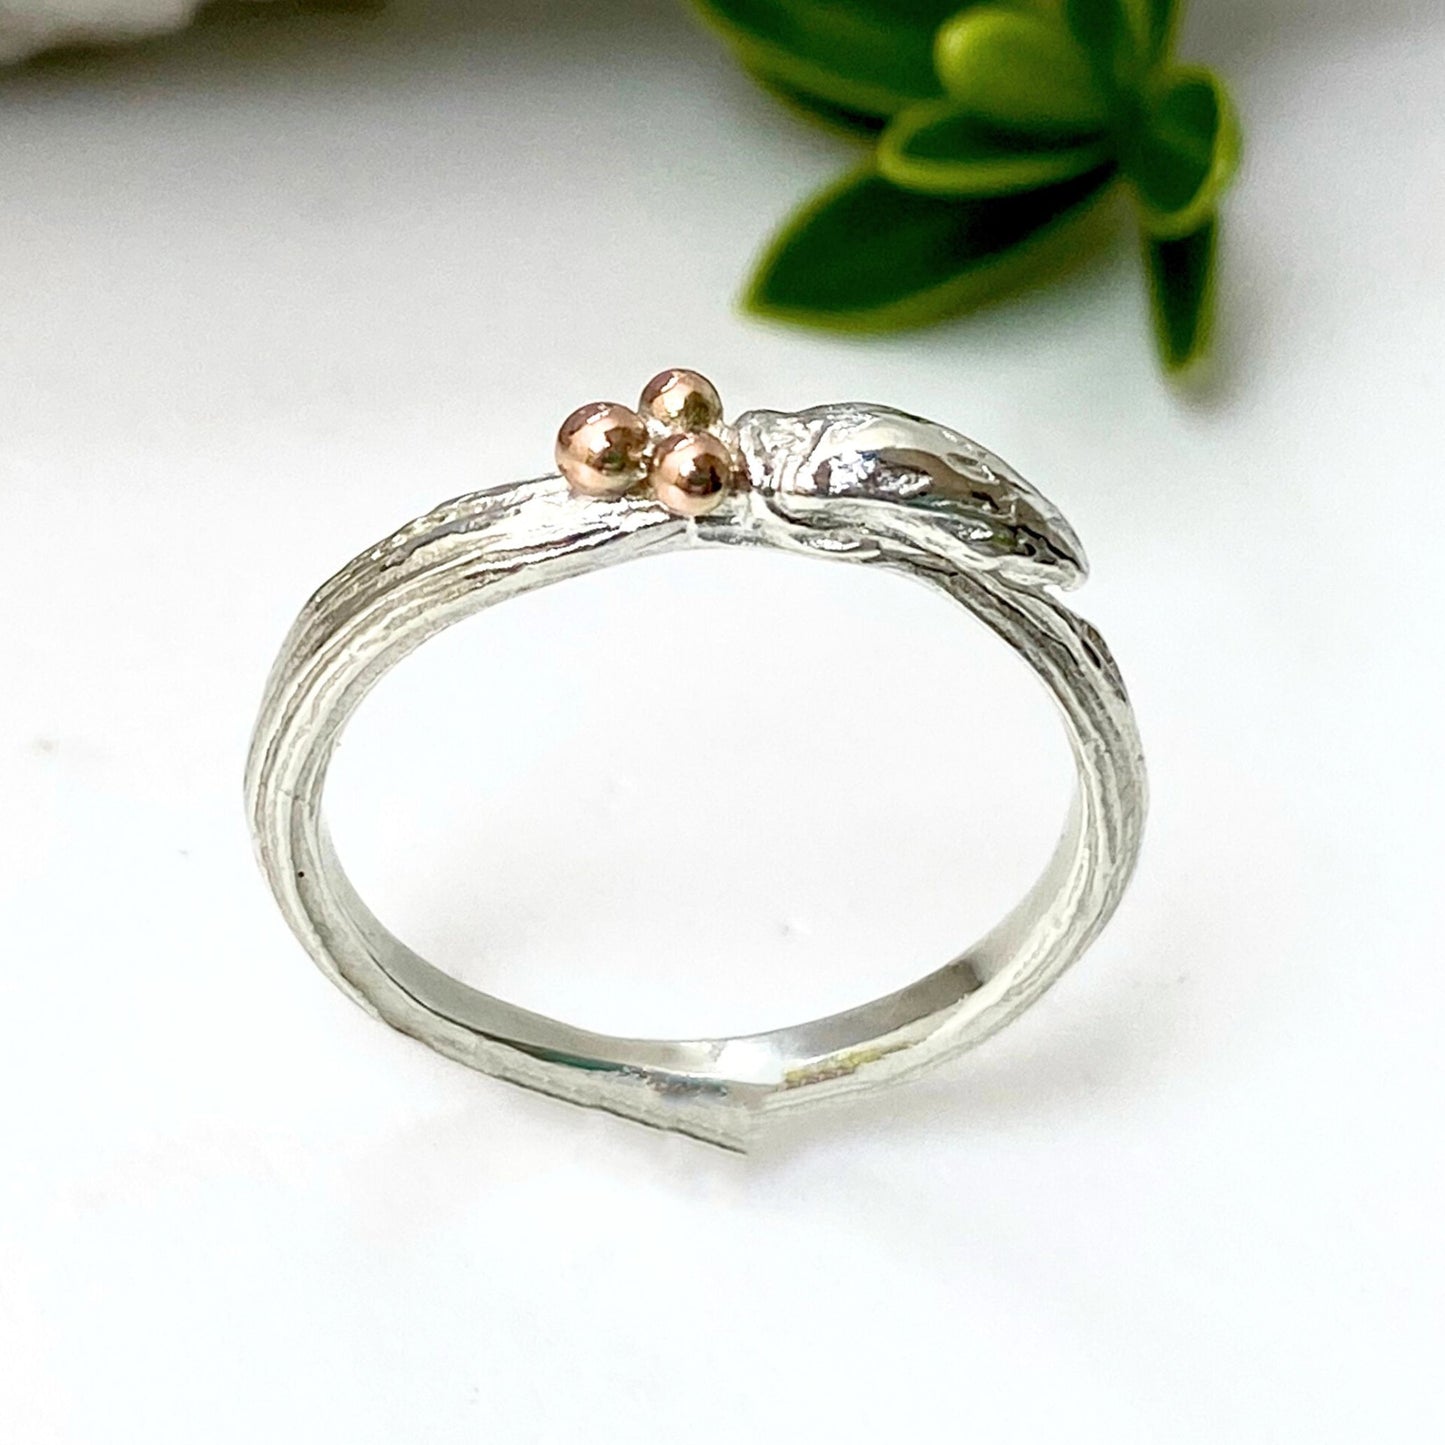 Willow Twig Bud Ring, Silver and Rose Gold Wedding Ring, Nature Stacking Ring